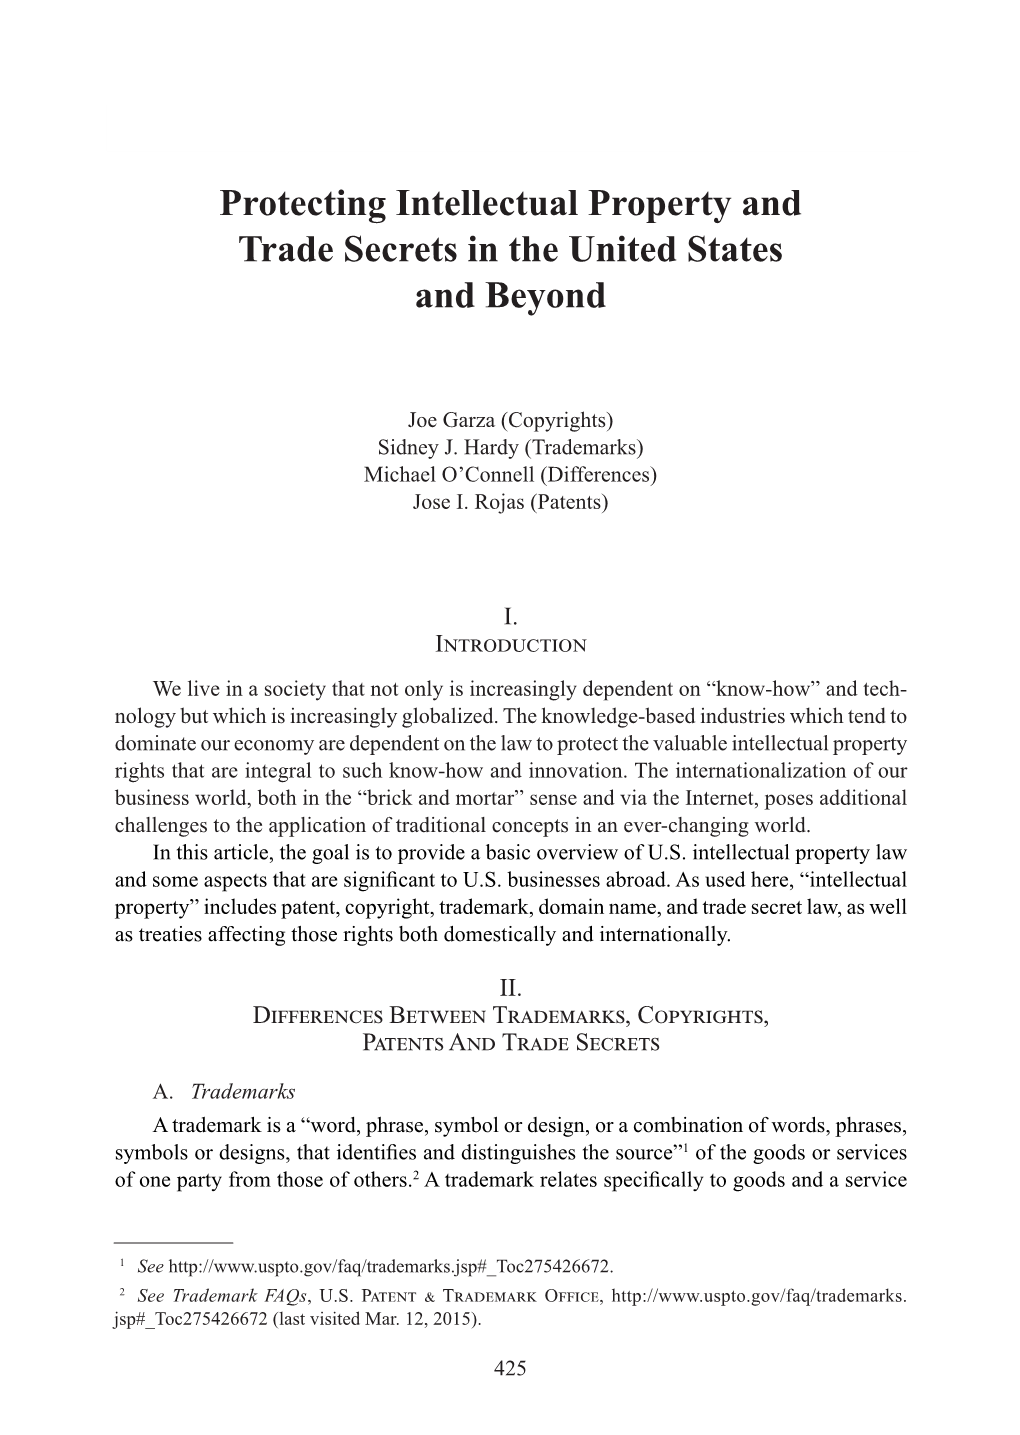 Protecting Intellectual Property and Trade Secrets in the United States and Beyond